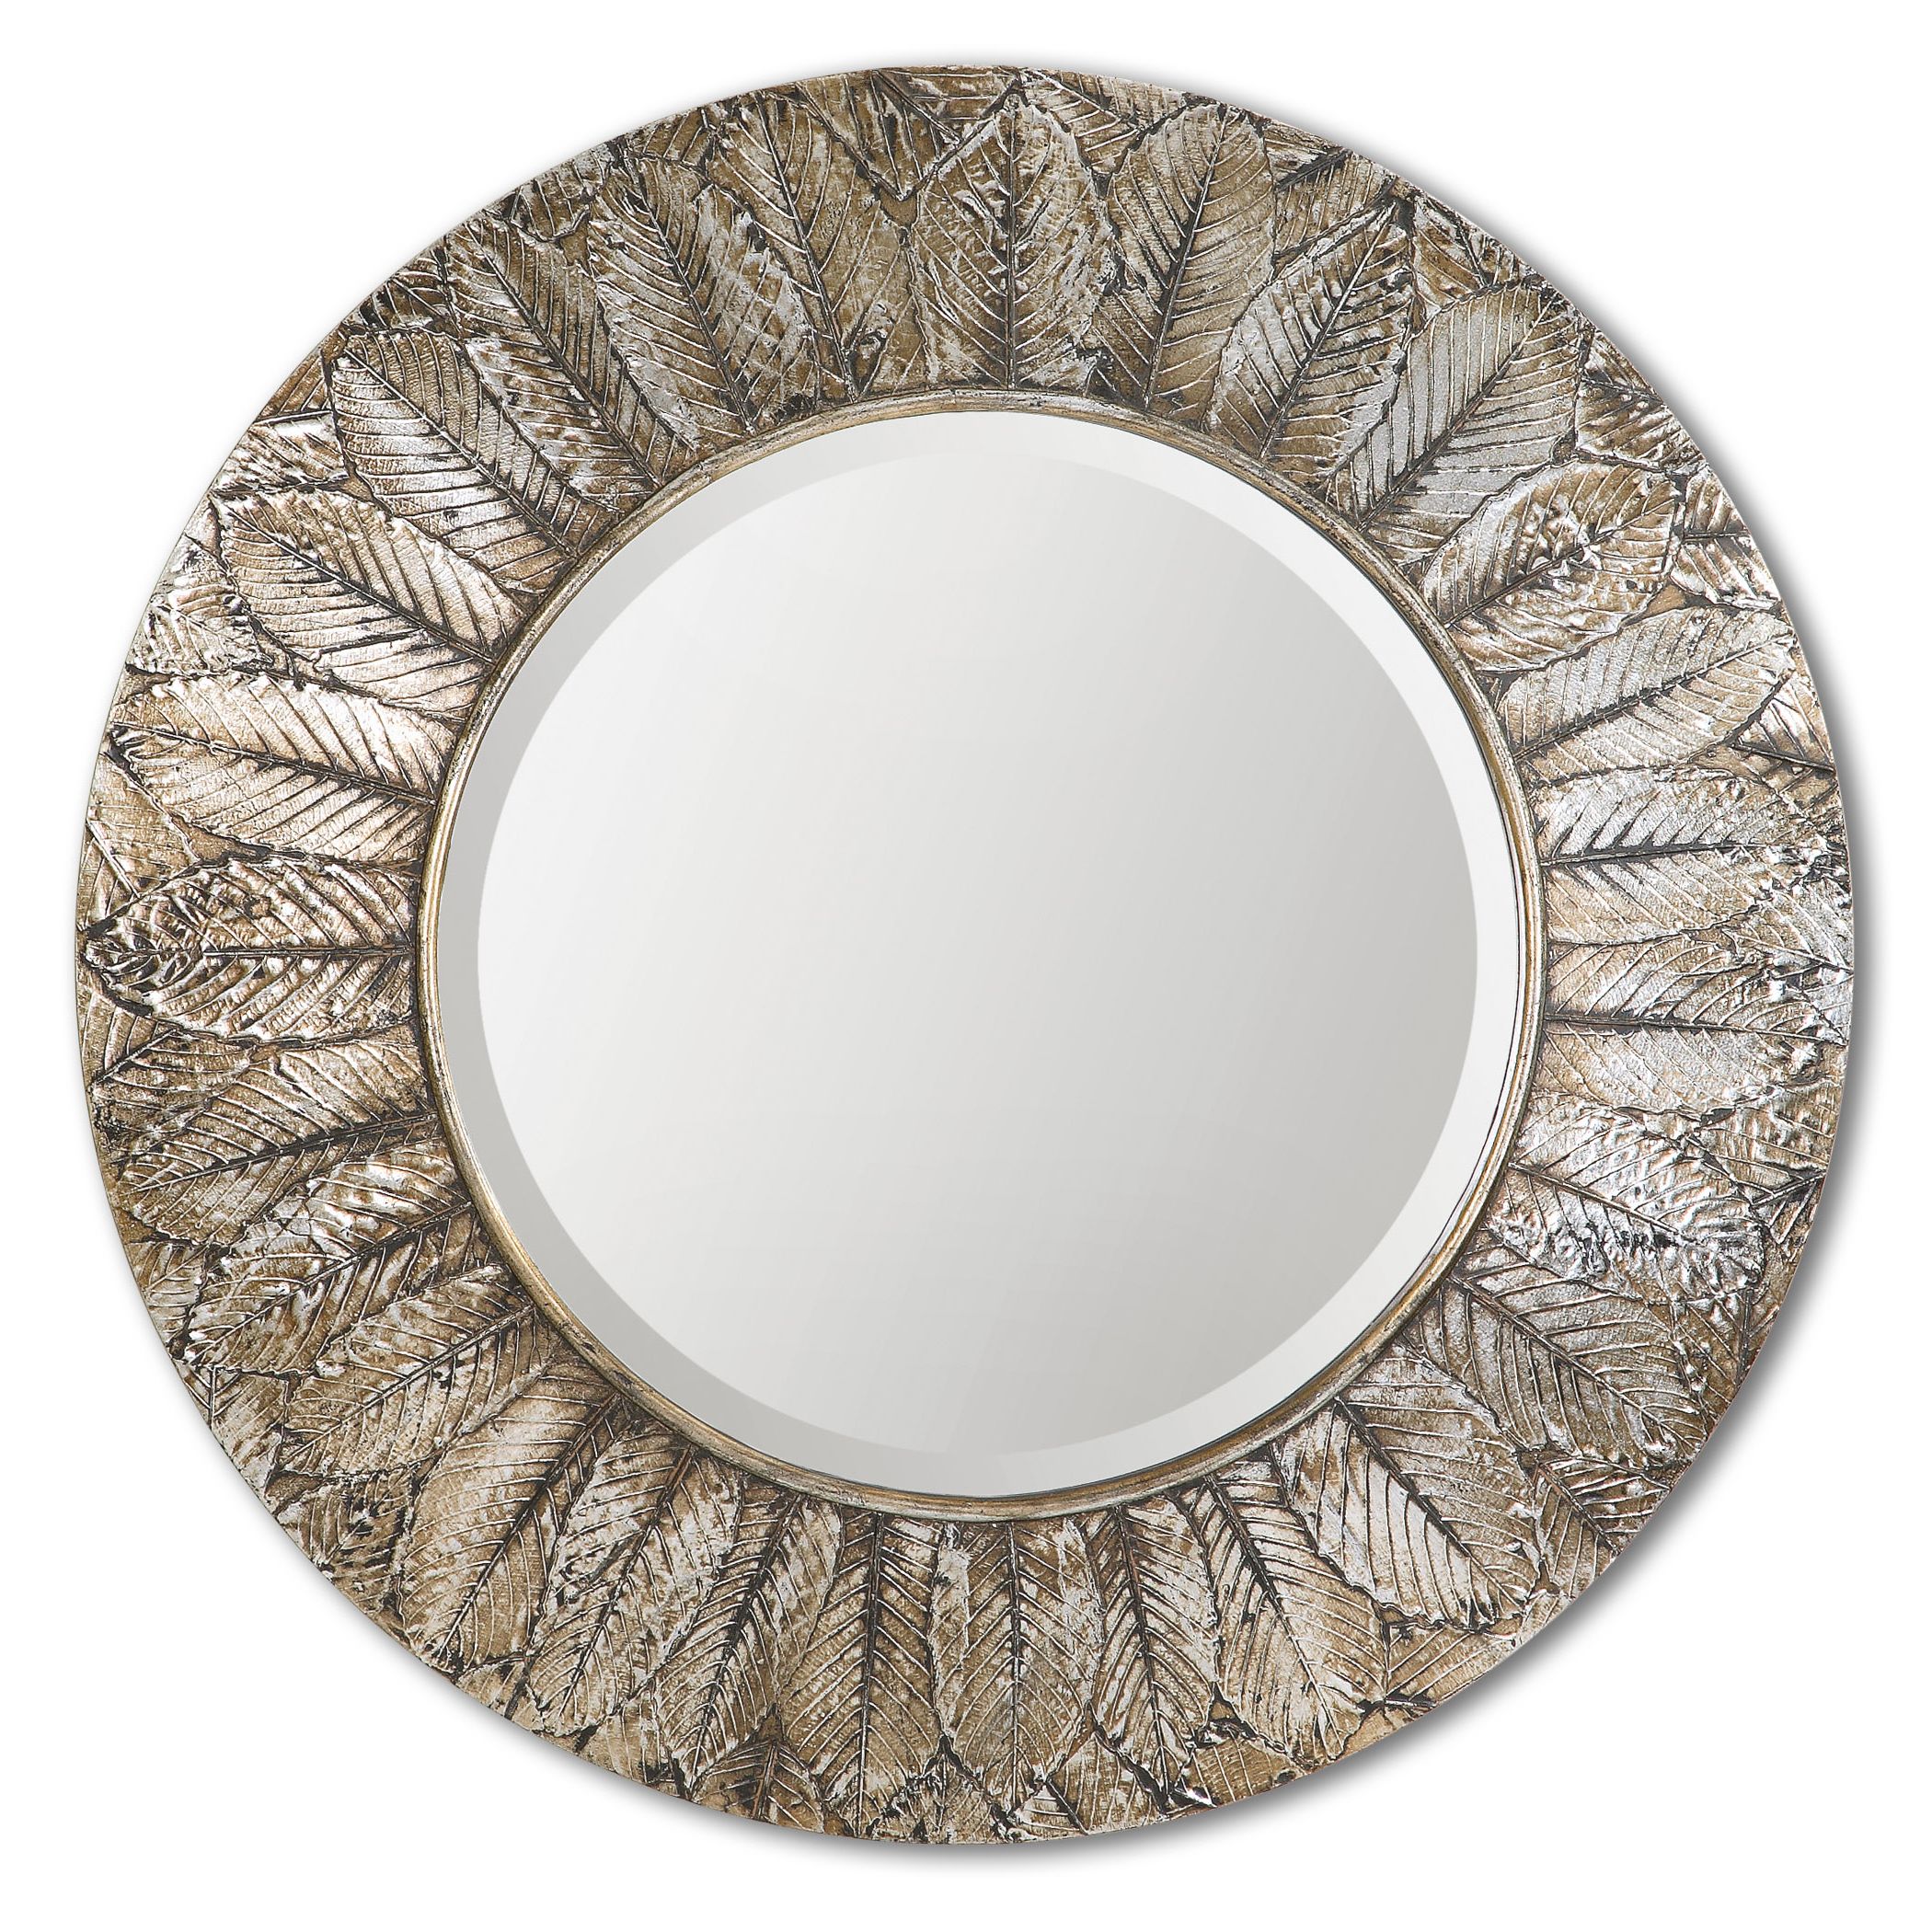 Uttermost Foliage Round Silver Leaf Mirror With Well Known Antique Gold Leaf Round Oversized Wall Mirrors (View 4 of 15)